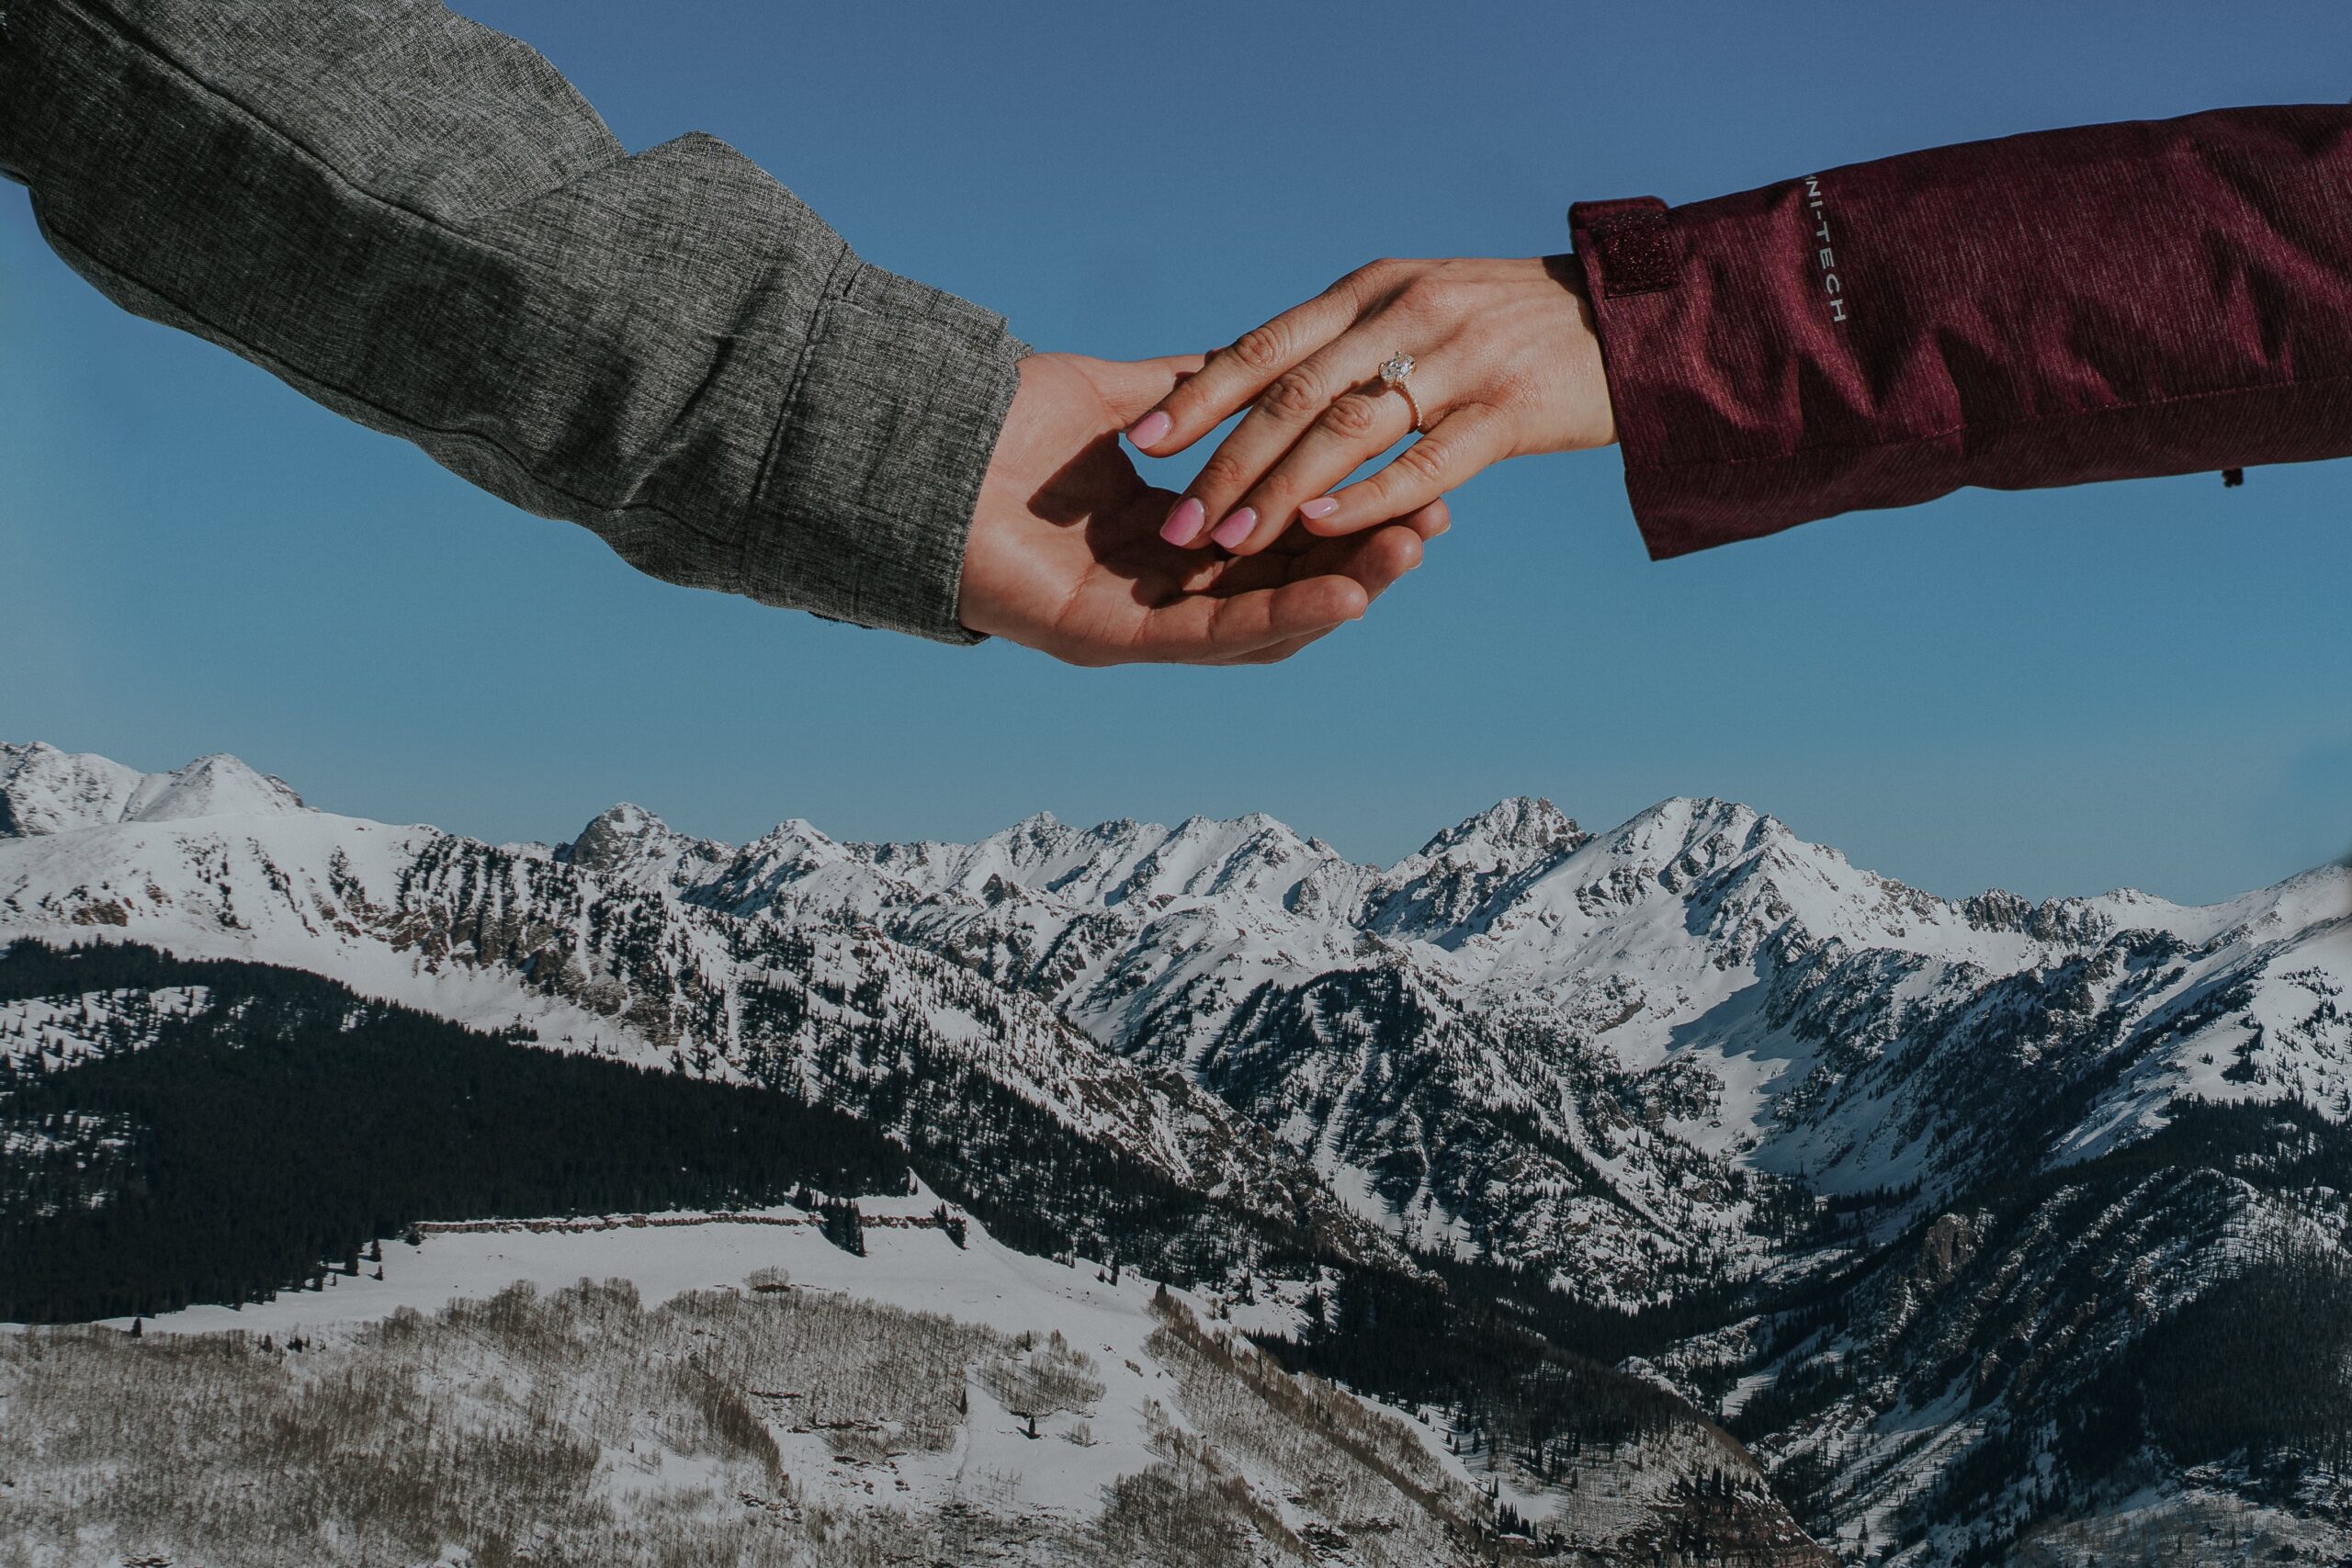 Elegant engagement ring sparkling on a backdrop of Vail Mountain's snow-capped peaks, epitomizing the romantic ambiance of a Vail engagement